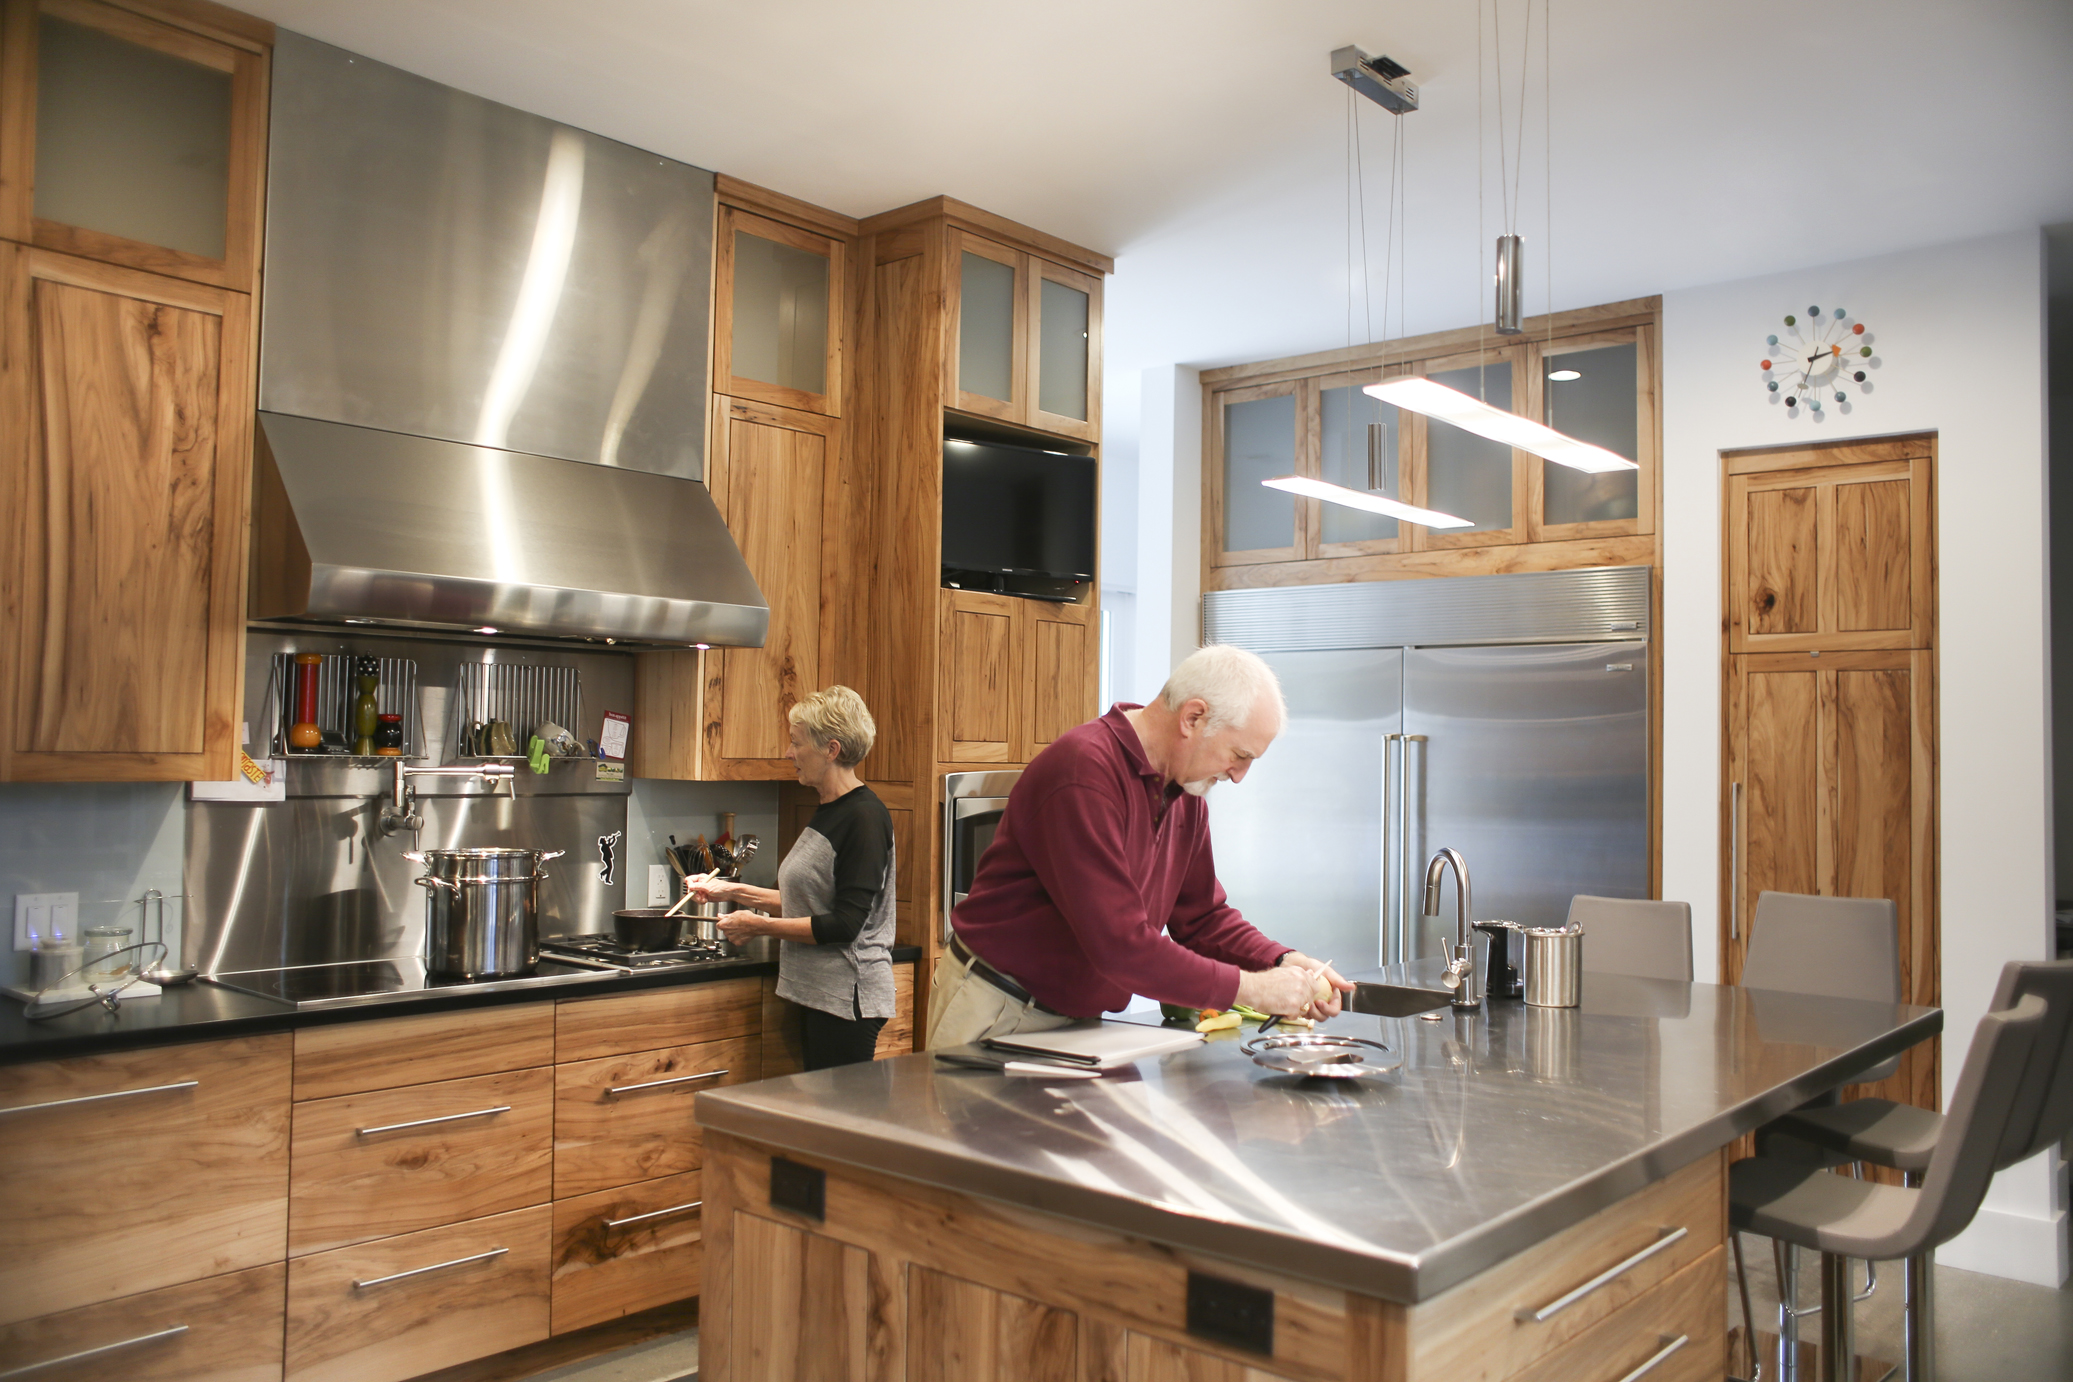 Tricia and Joe are avid cooks, so the kitchen had to be as functional as it is beautiful. “The greatest thing about this space is the storage and organization it allows,” says Tricia. “Joe really likes the induction cooktop and the warming drawer.” All countertops, besides the stainless steel on the island, are made from recycled paper.